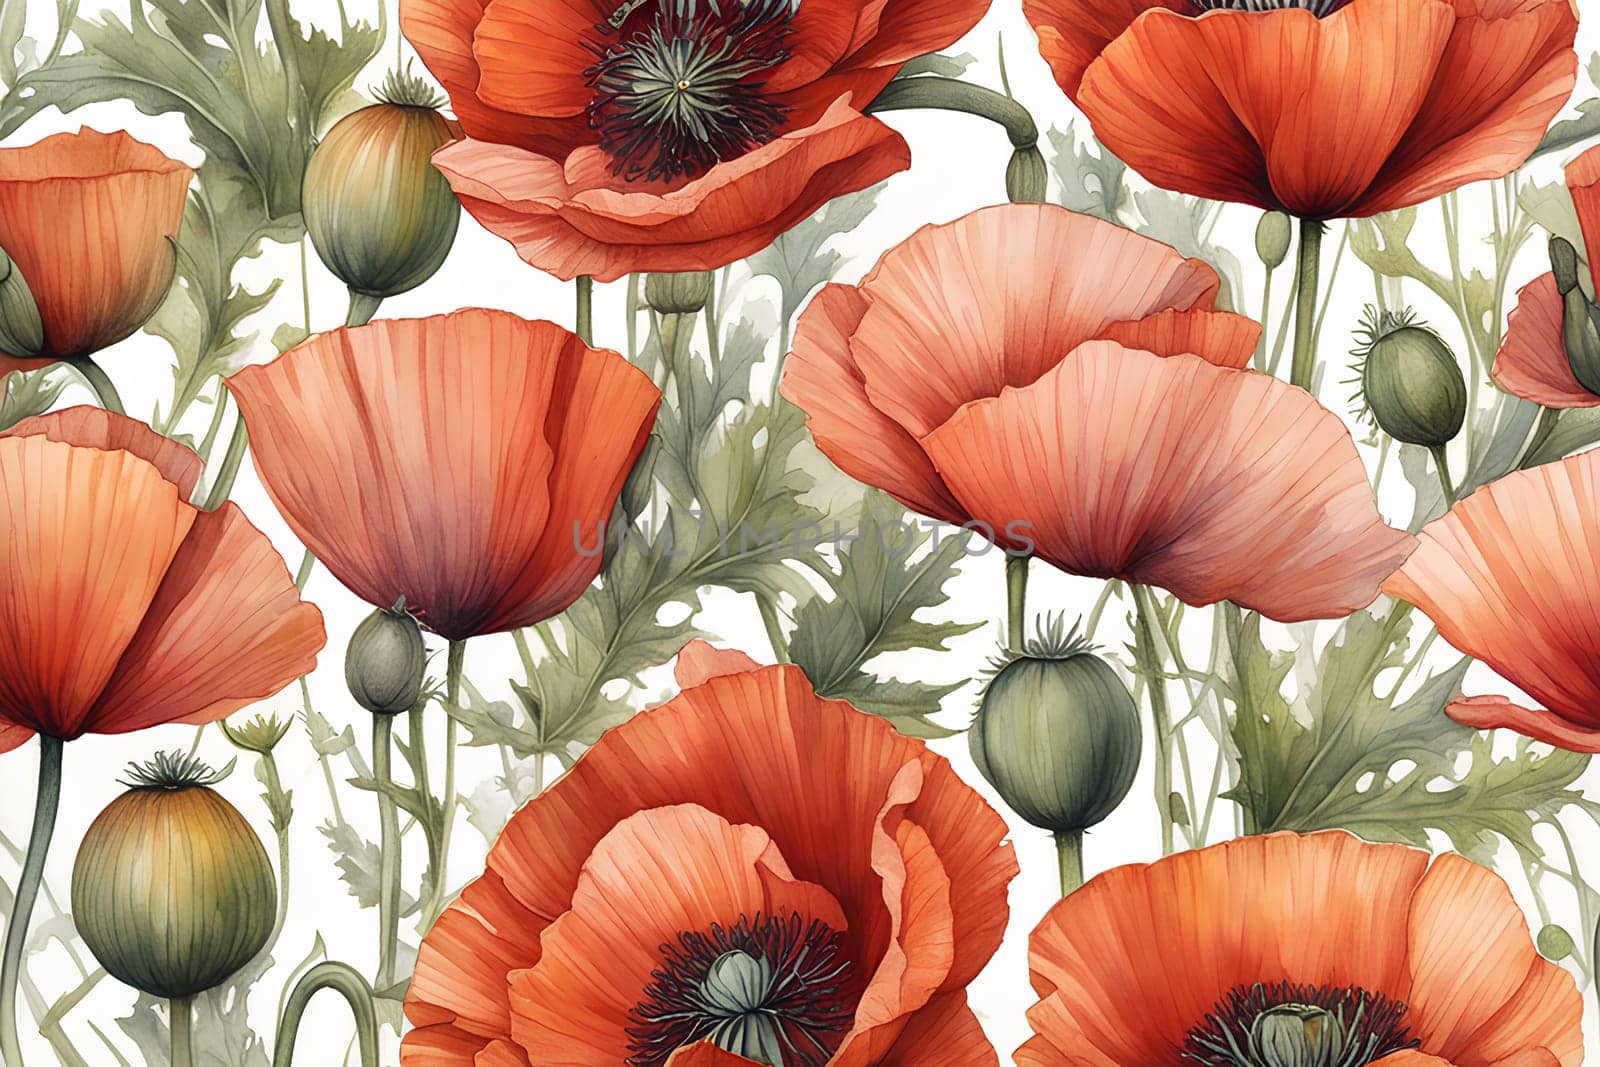 Wild poppies, wet watercolor art by Annu1tochka